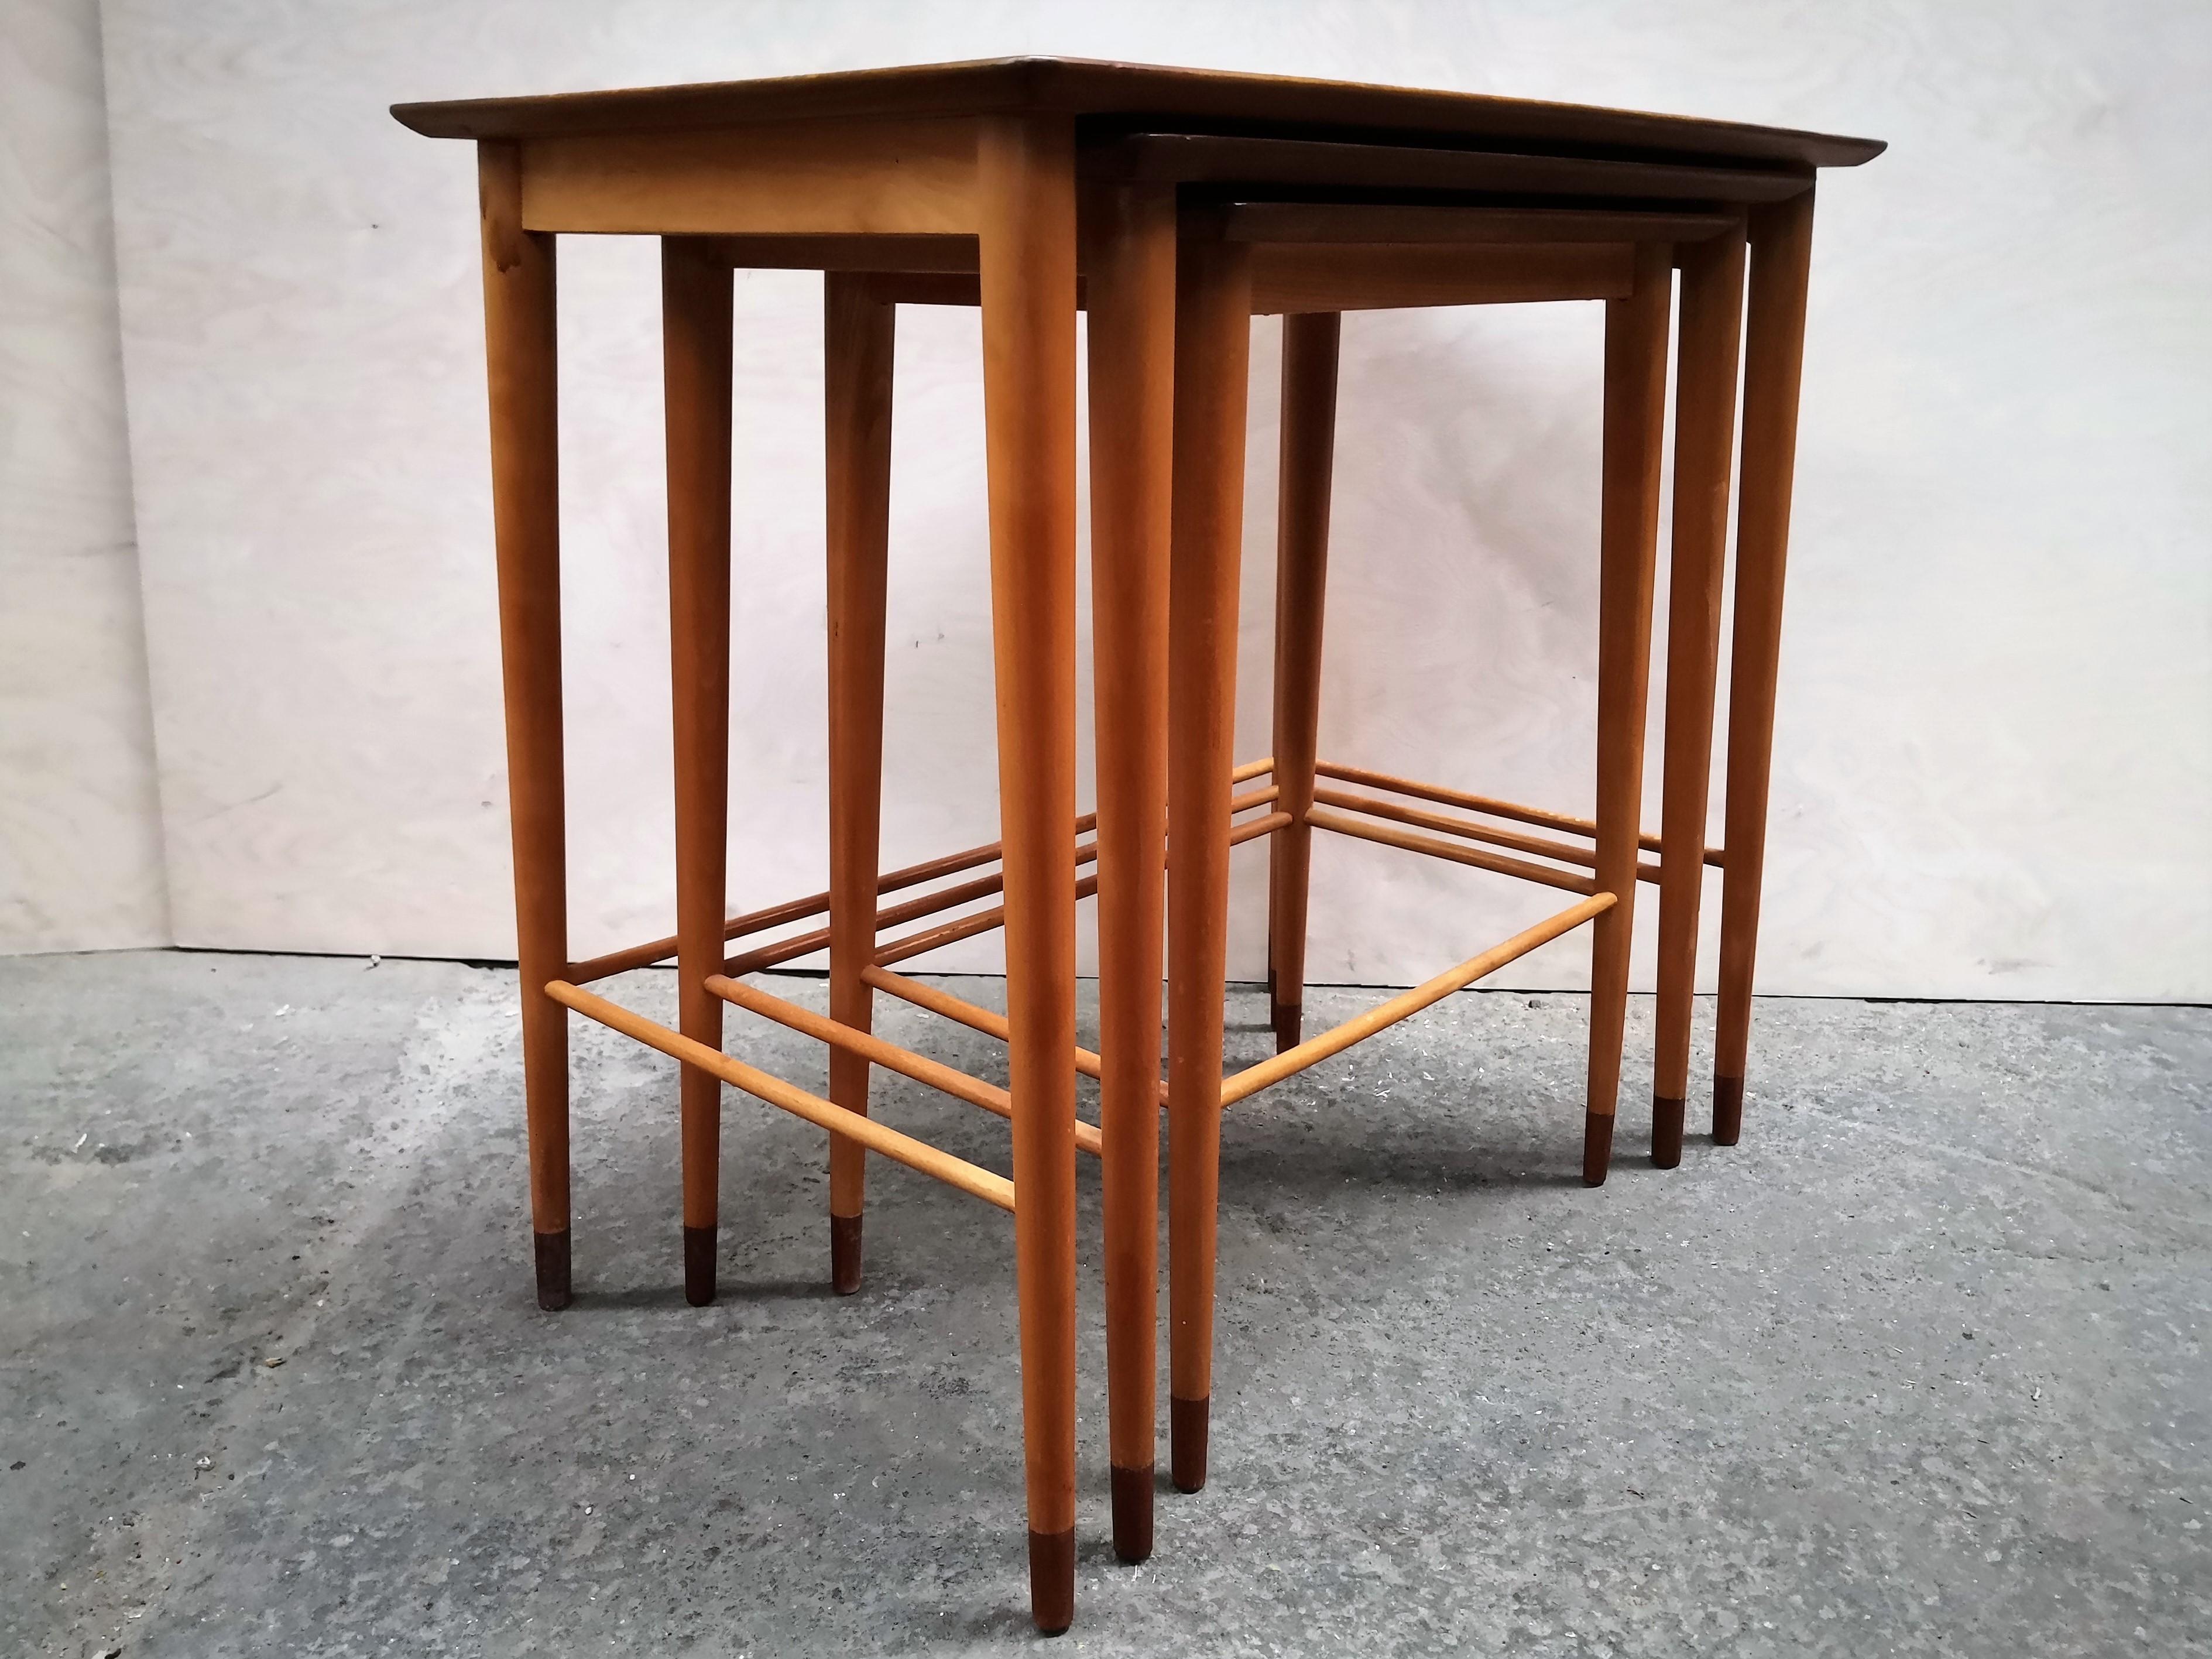 This set of Danish nesting tables are rare and difficult to trace the origin of. They are definitely a collectors item as well as fully functional set of tables.